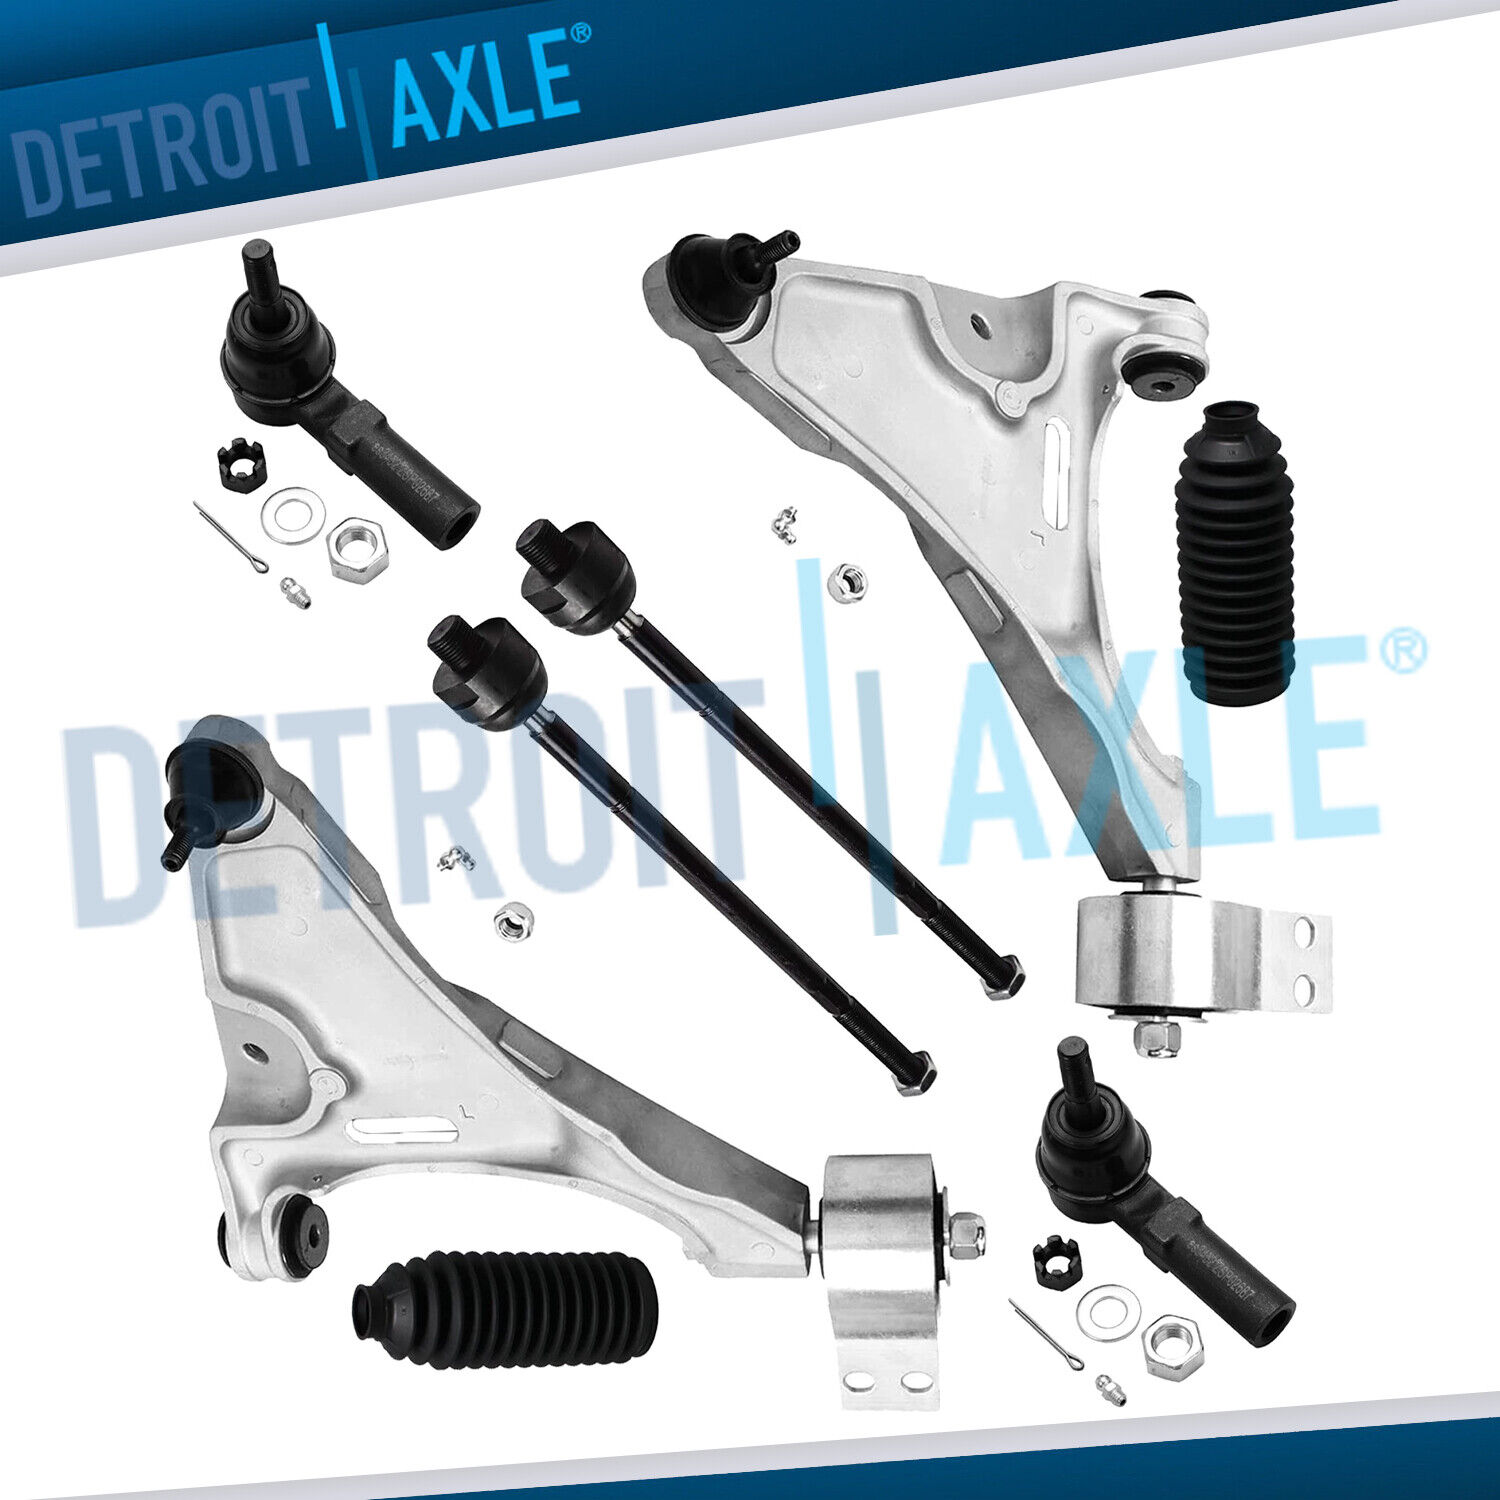 Front Lower Control Arms & Suspension Kit for 2006-11 Cadillac DTS Buick Lucerne